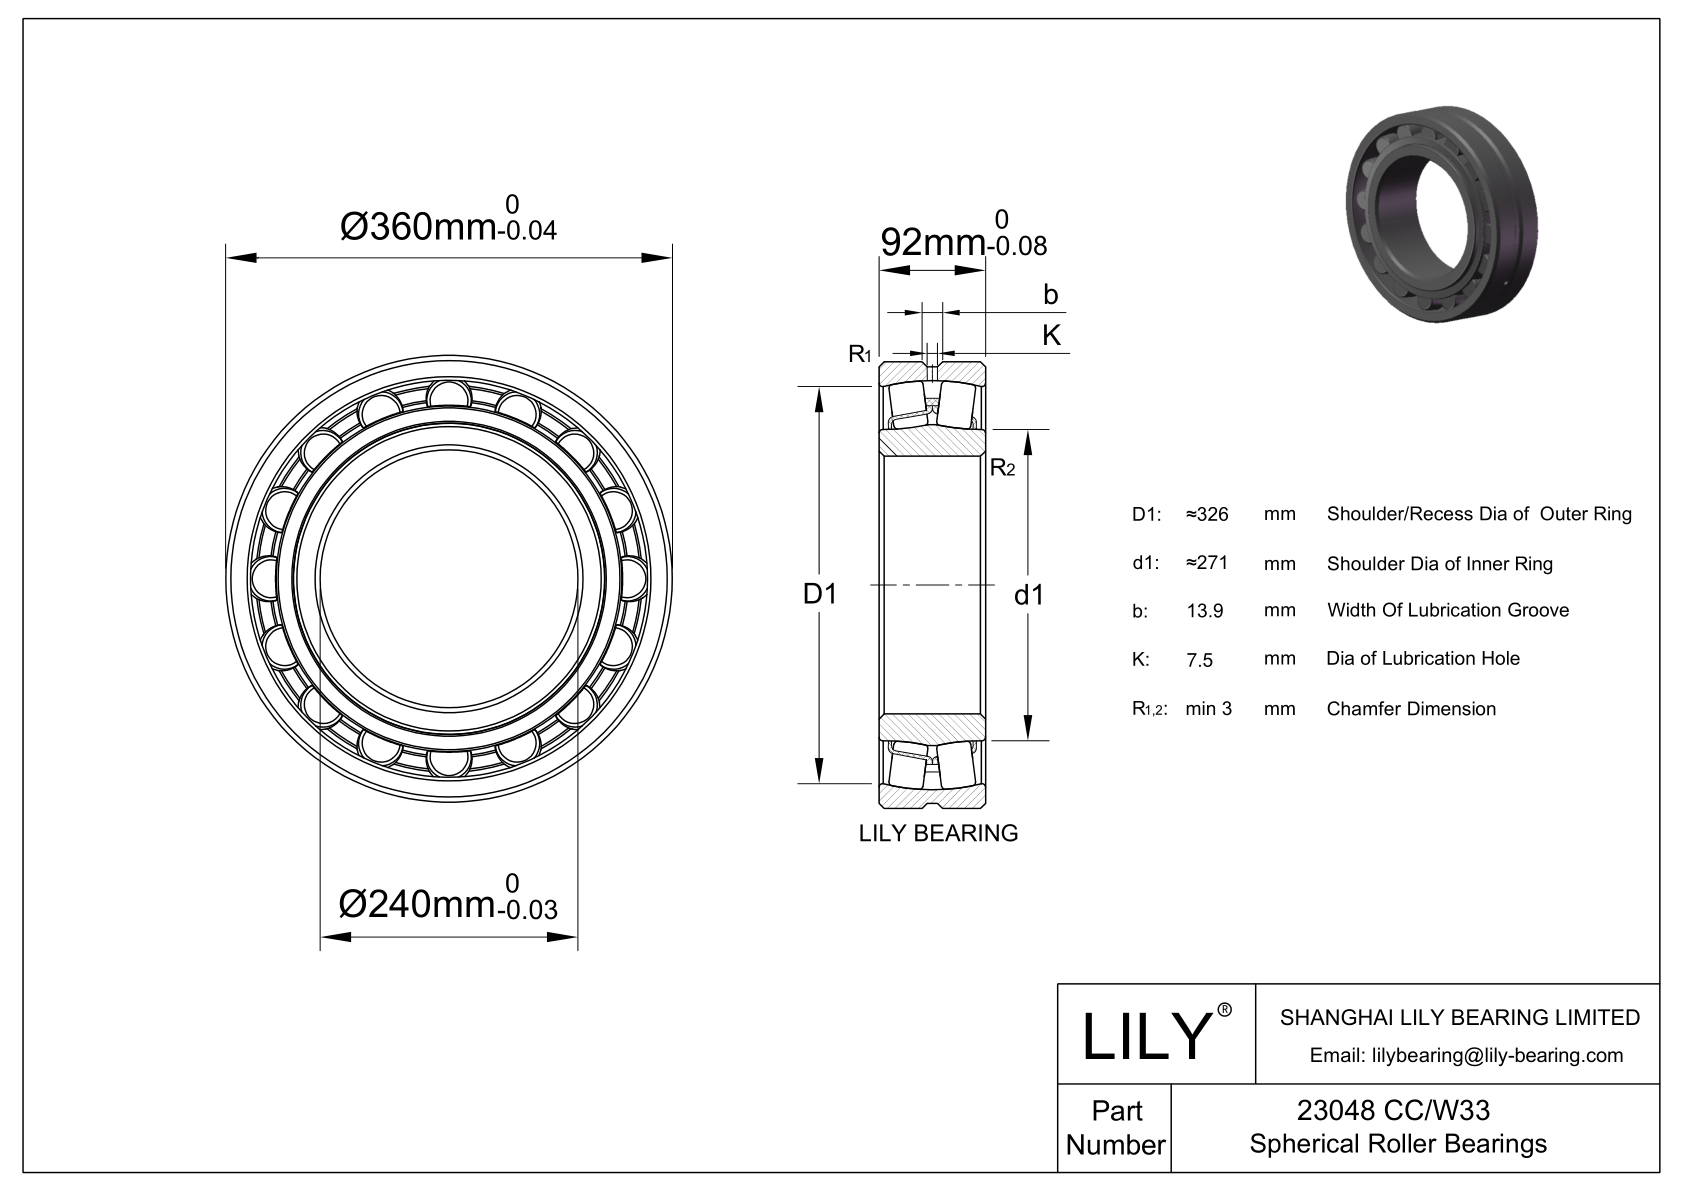 23048 CC/W33 | Double Row Spherical Roller Bearing - SKF | Lily 